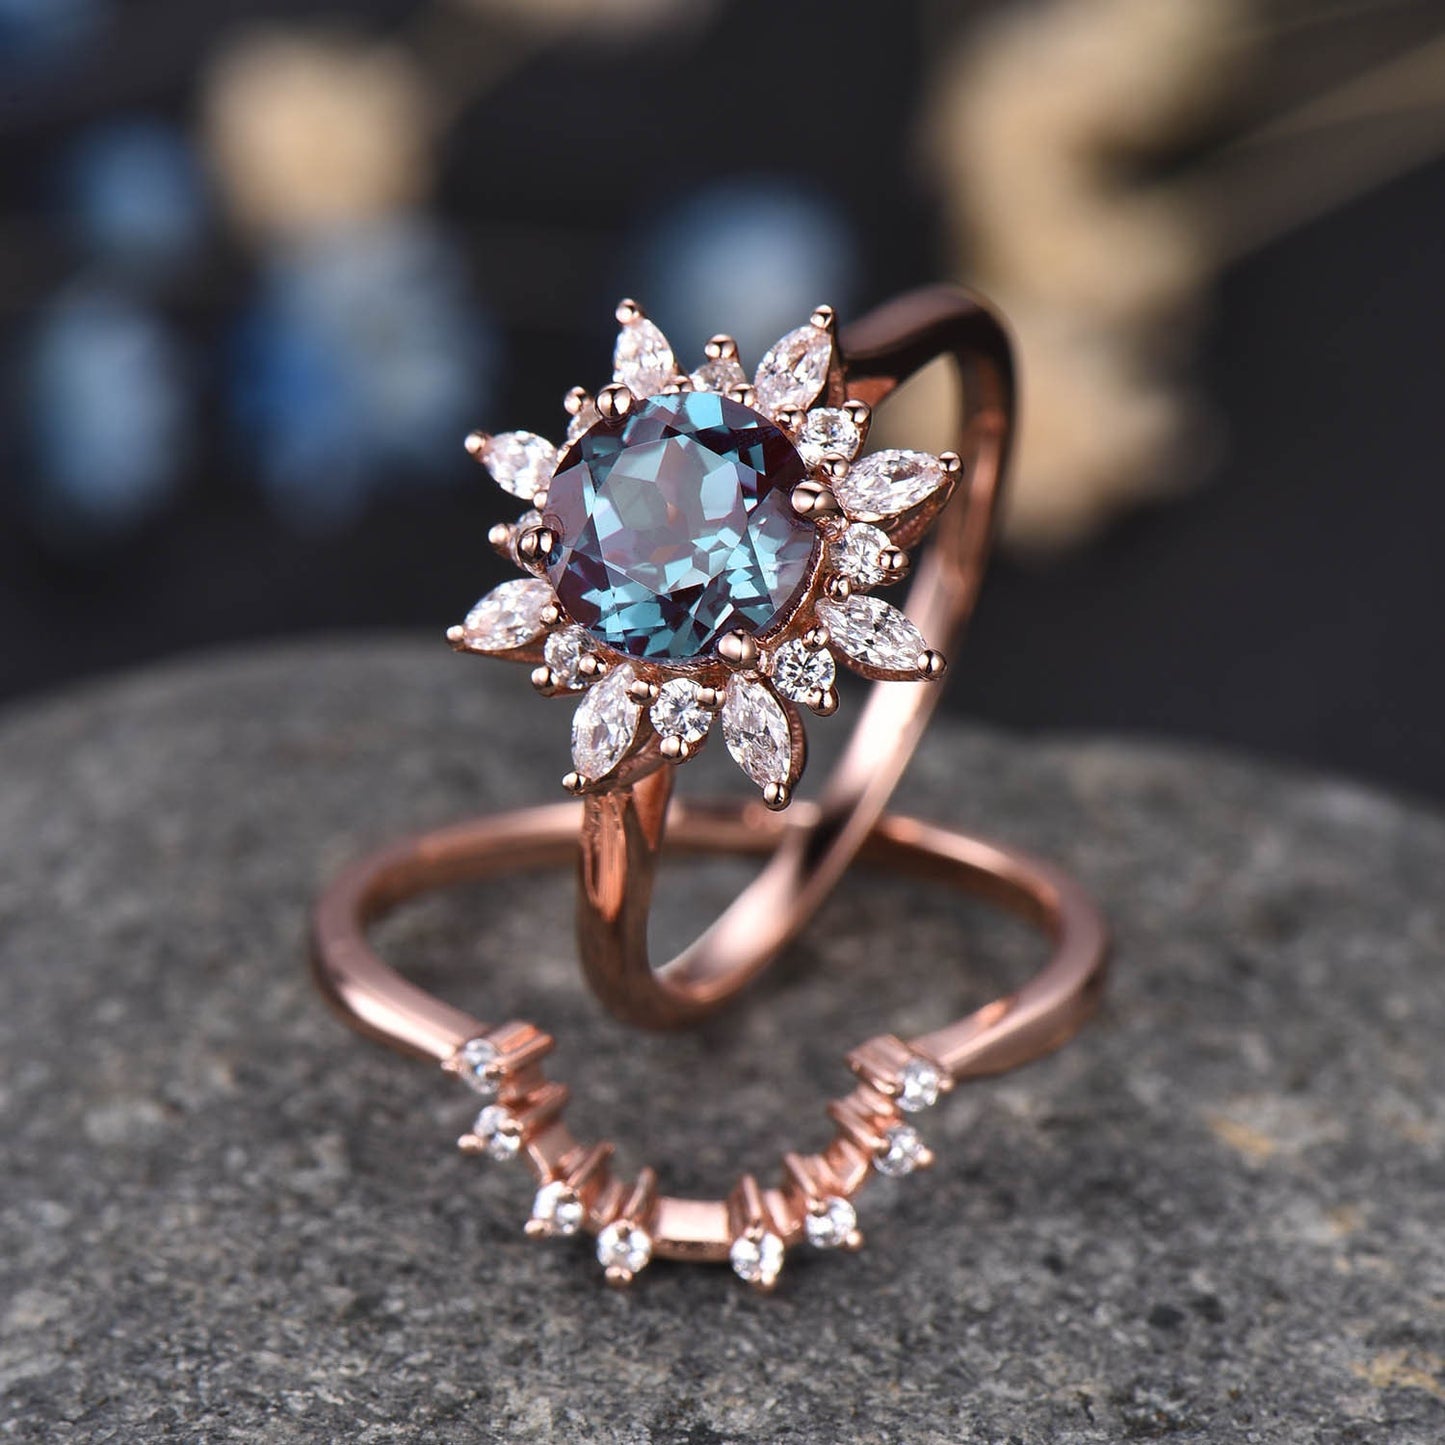 Alexandrite Engagement Ring Set Vintage Rose Gold Ring For Women Floral Diamond / Moissanite Halo Promise Jewelry Anniversary Gift For Her